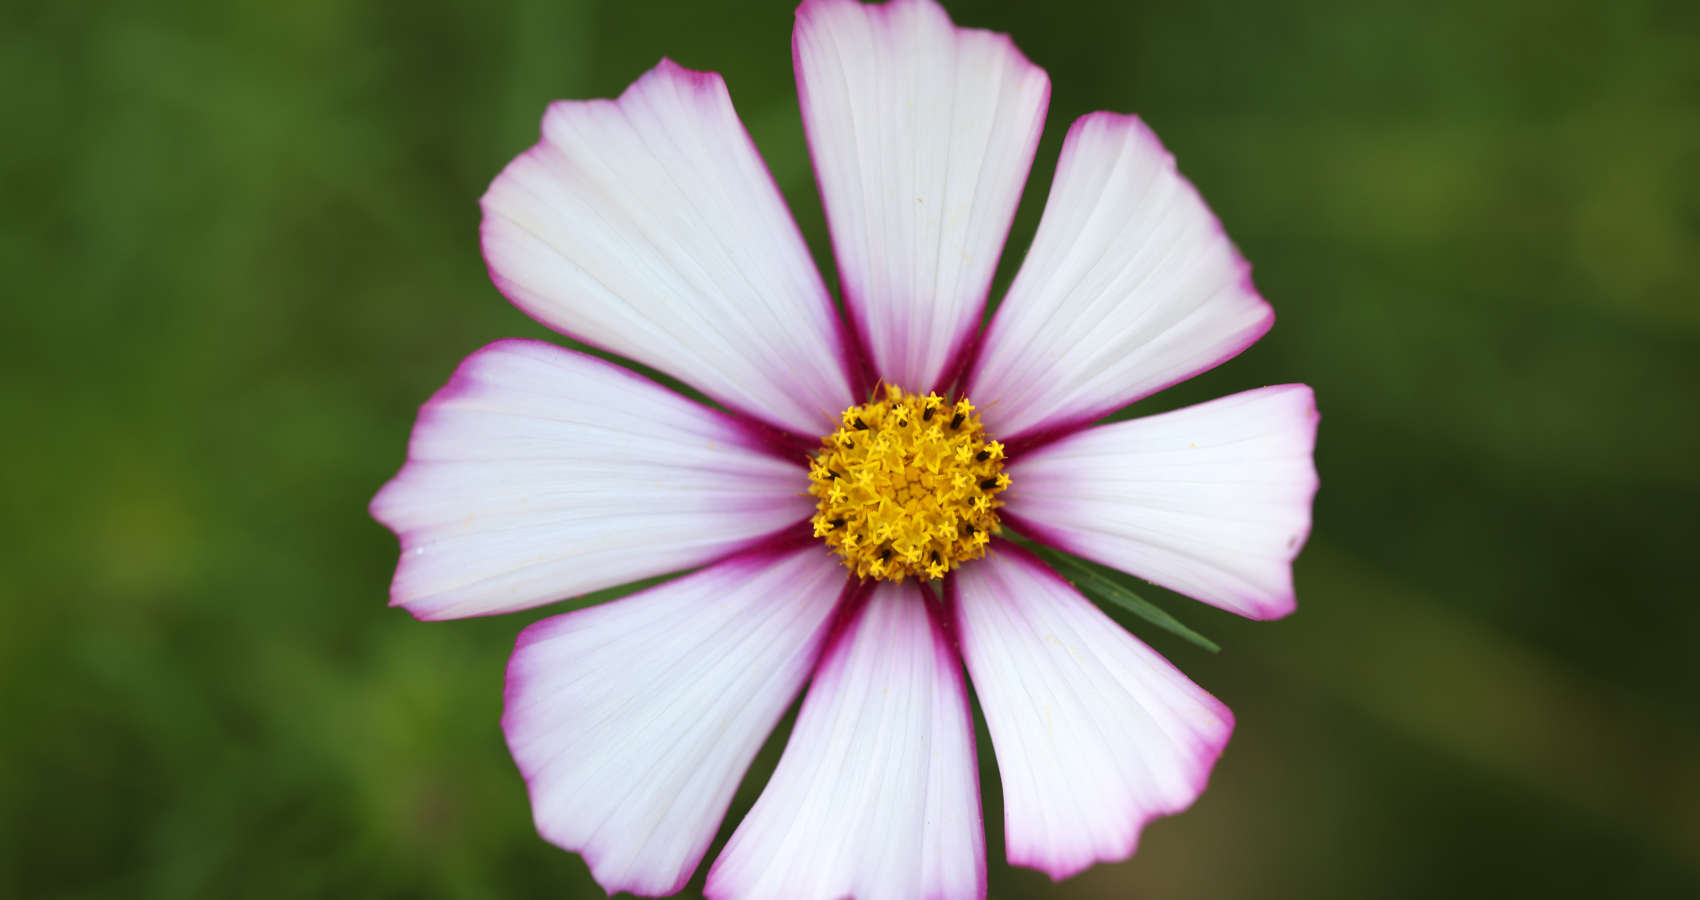 The Cosmos Flower, prose by Charlie Williamson at Spillwords.com